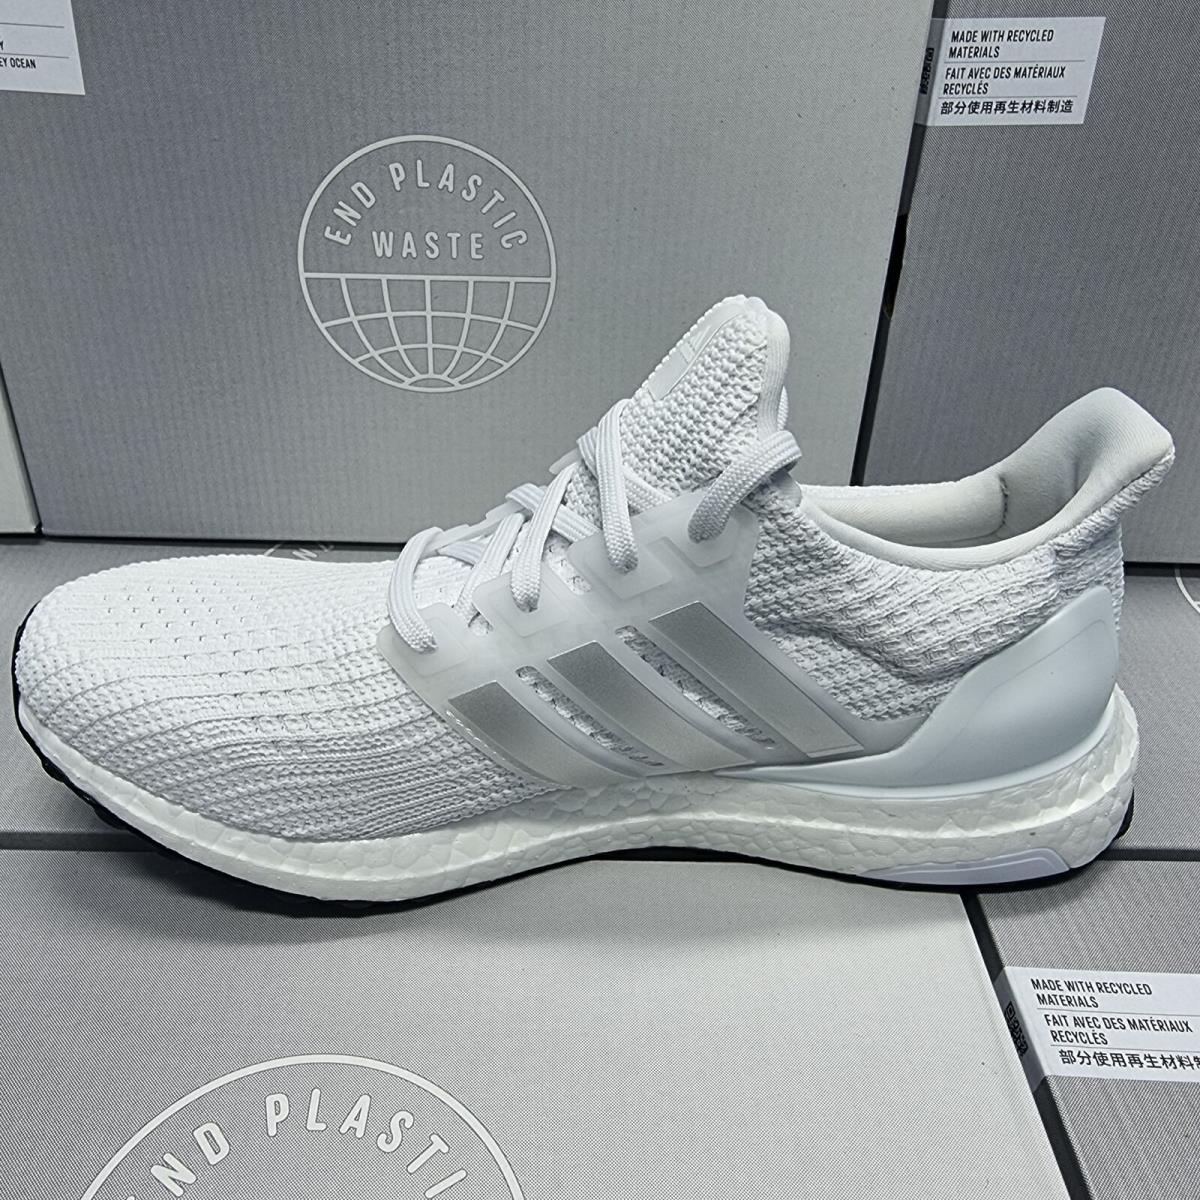 Adidas shoes Ultraboost - White/Grey 1